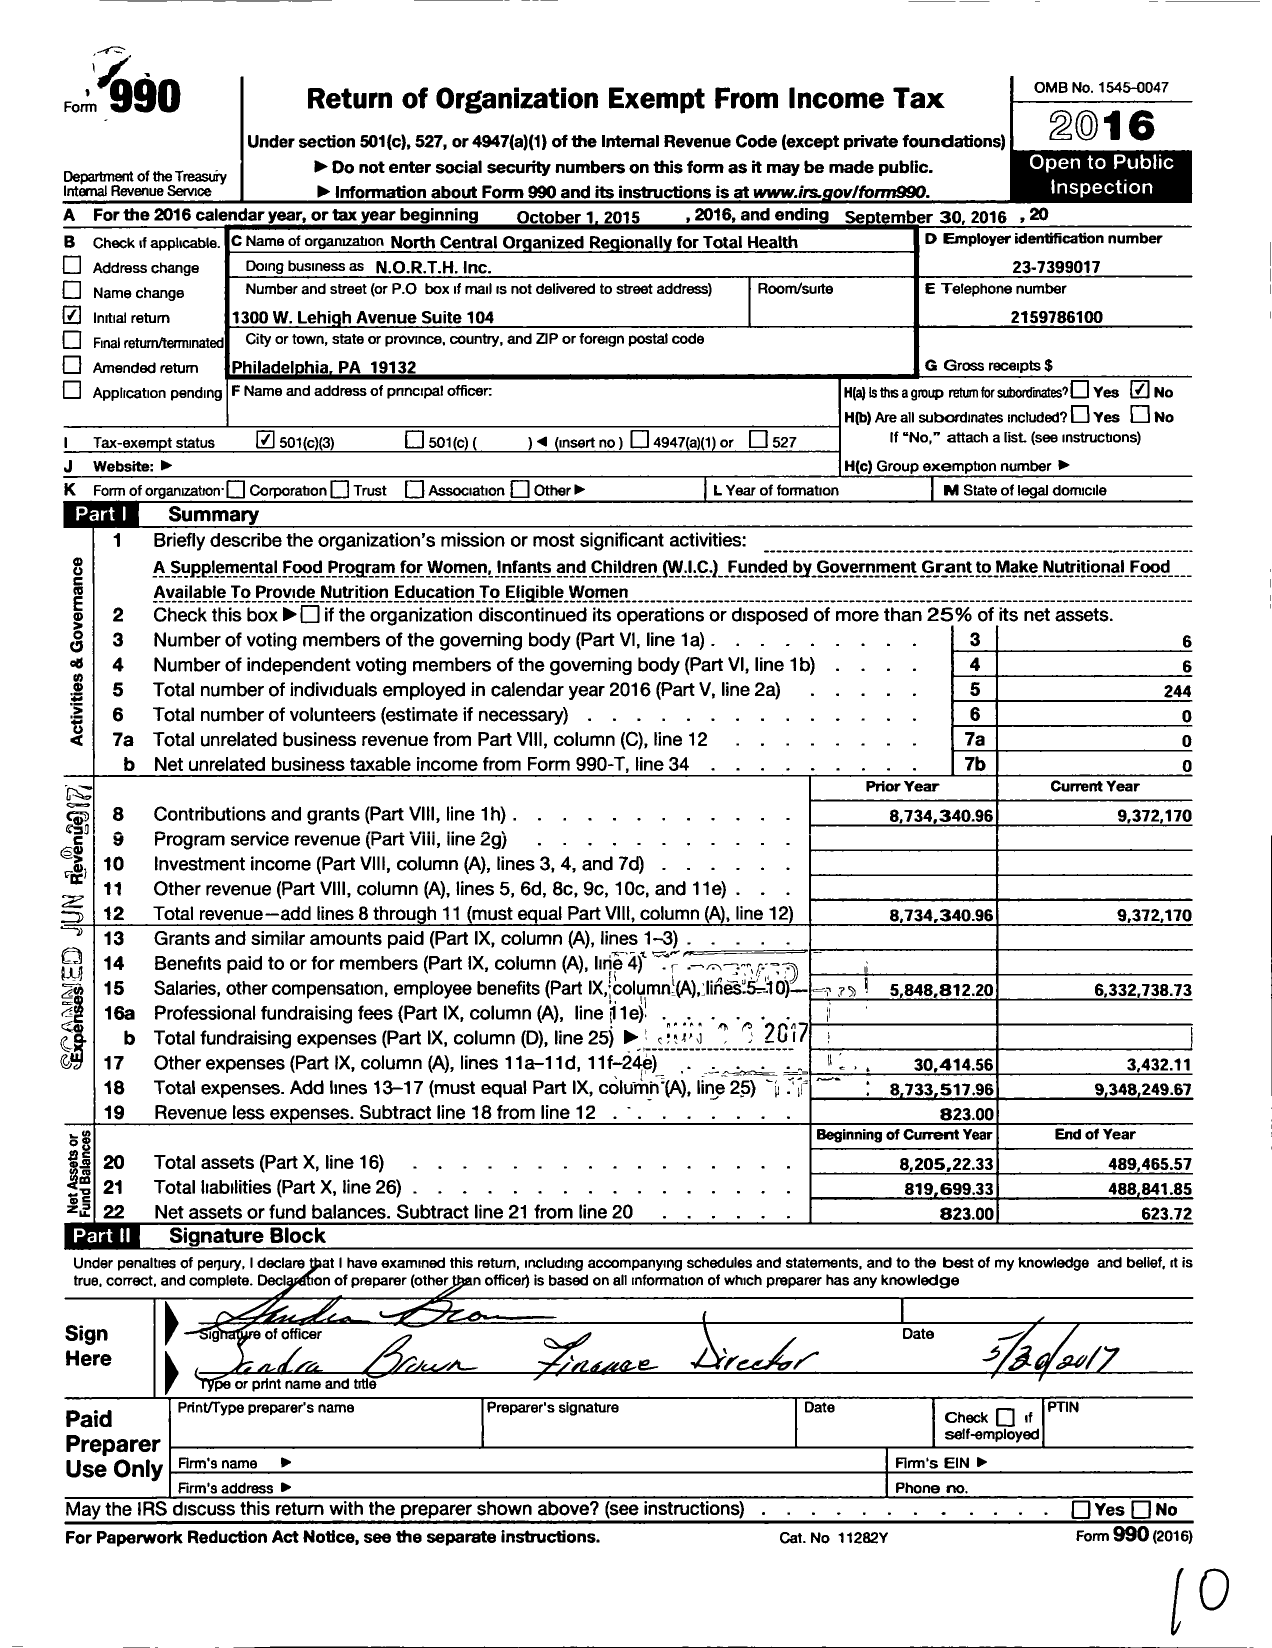 Image of first page of 2015 Form 990 for Northcentral Central Organized Regionally for Total Health